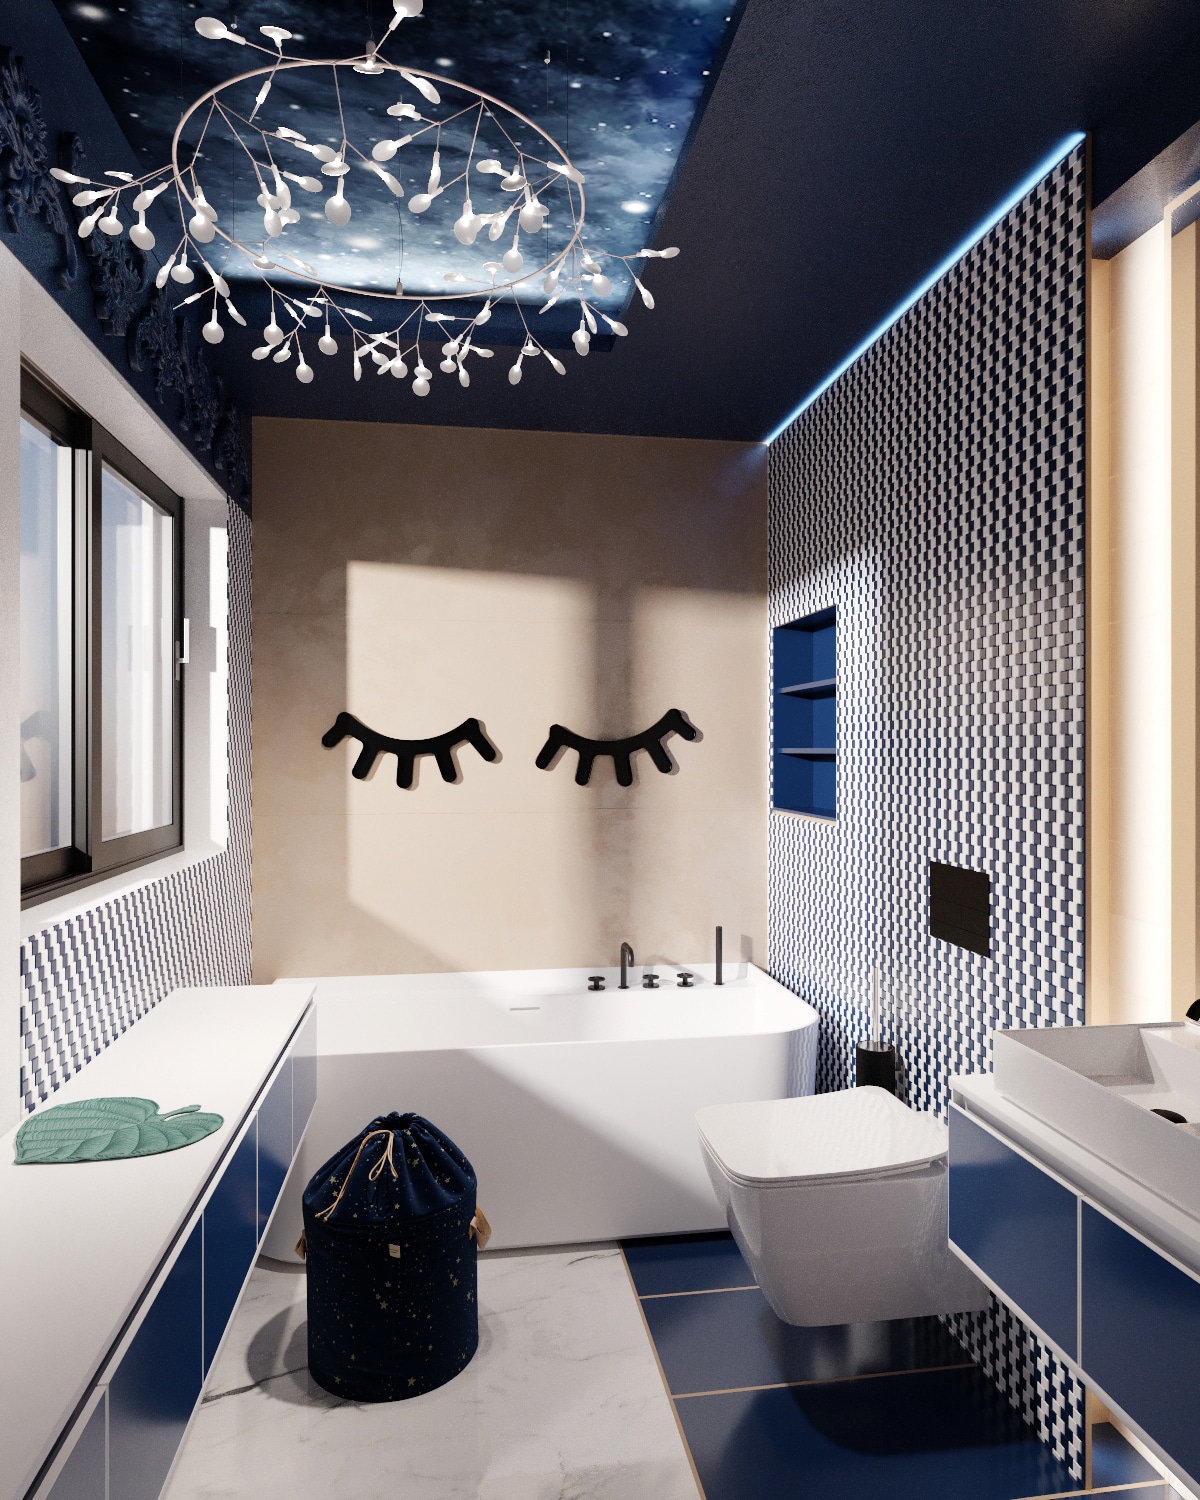 The child bathroom rendering, blue and champagne design, with starry sky print on the ceiling.